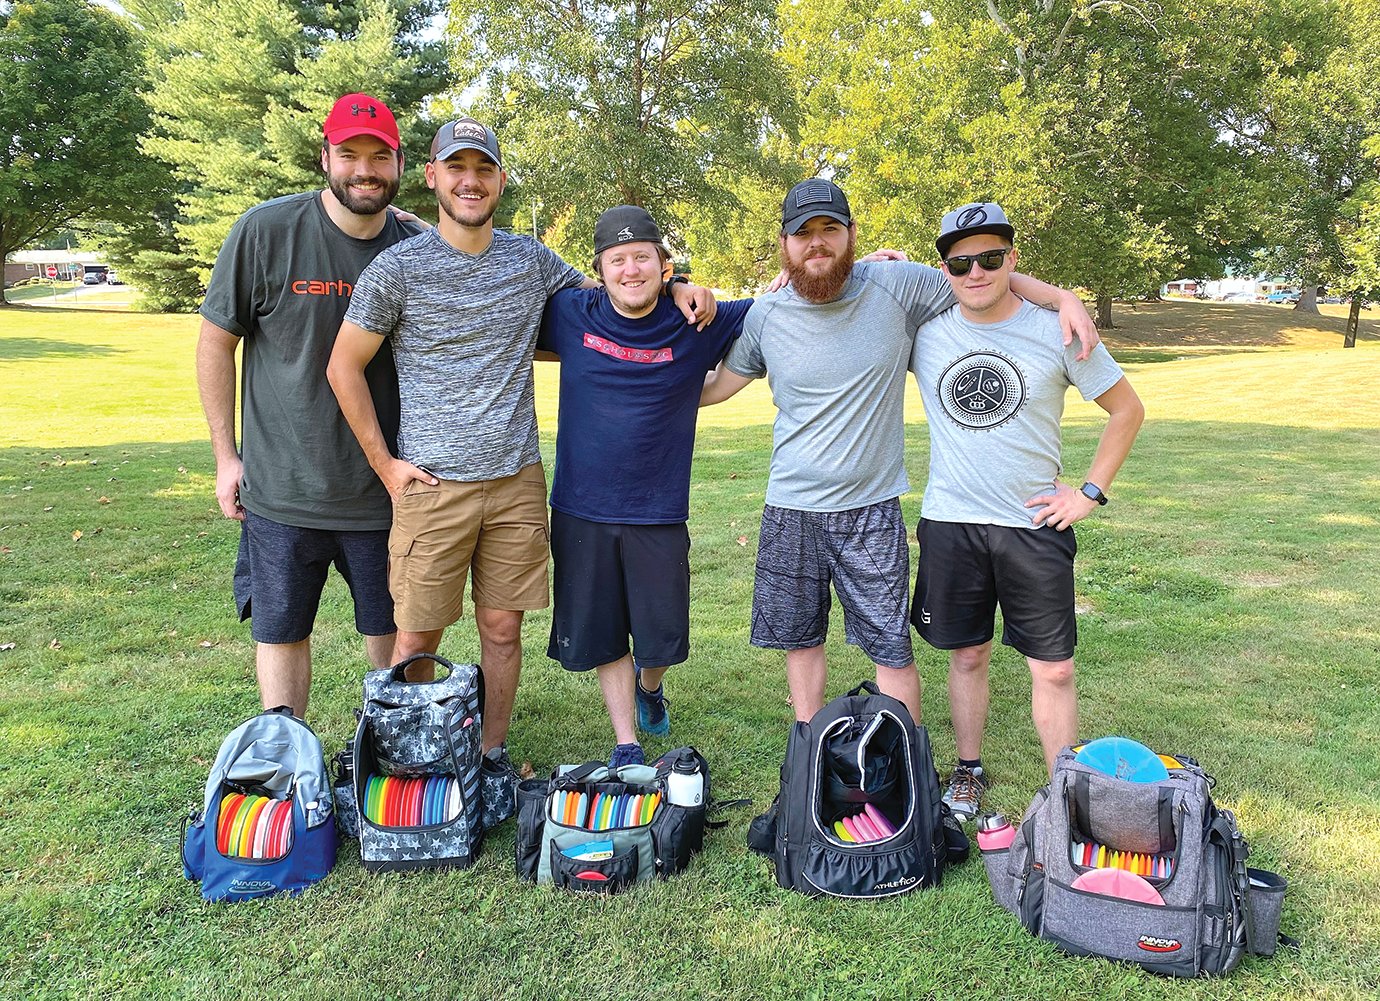 A group of frisbee golfers from Bartlett, Illinois visits the links at Milligan Park on Friday, taking a break from their campsite at Raccoon Lake this week. The Illini visiting Friday include Kevin Ostrander, from left, John Gerdevich, Evan Kownacki, Anthony Yurik and Austin Kownacki.